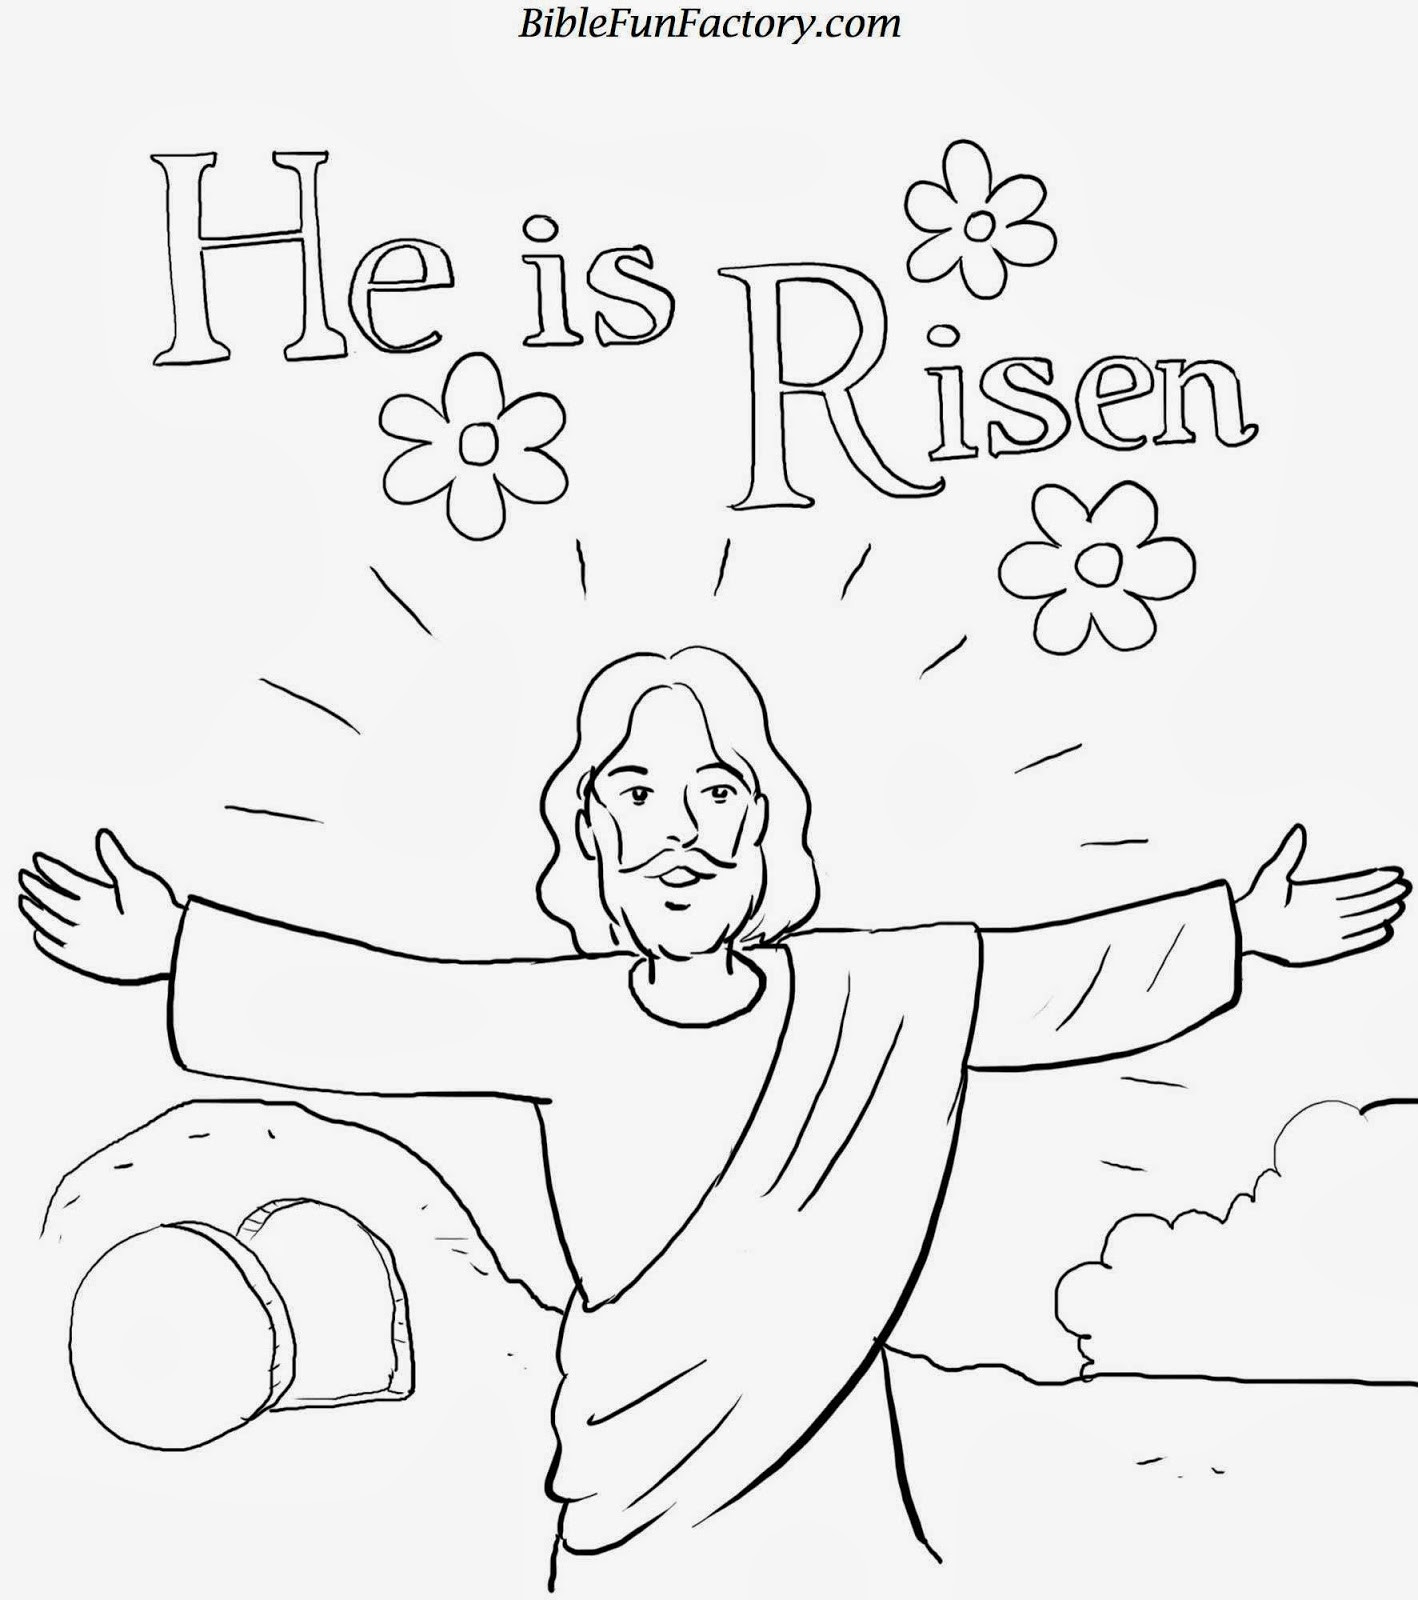 Preschool Bible Coloring Pages
 Preschool Bible Easter Coloring Pages The Color Panda